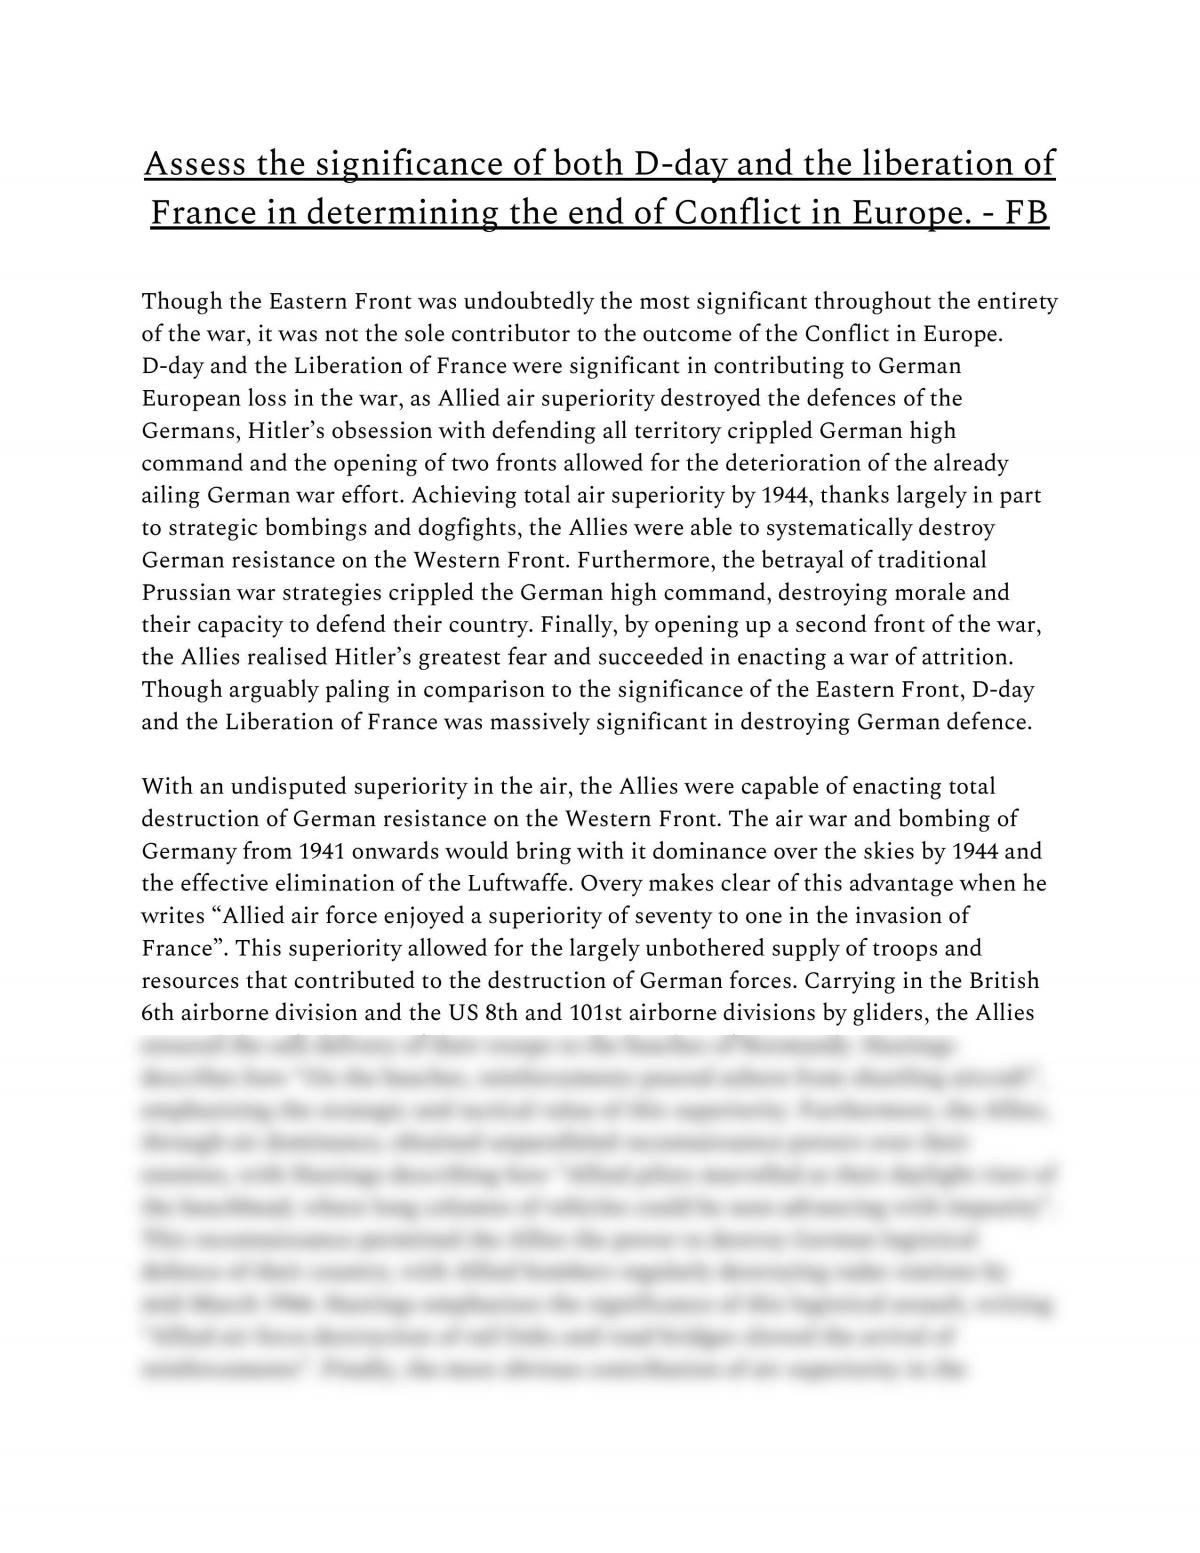 Significance of D-day and Liberation of France to Conflict in Europe - Page 1